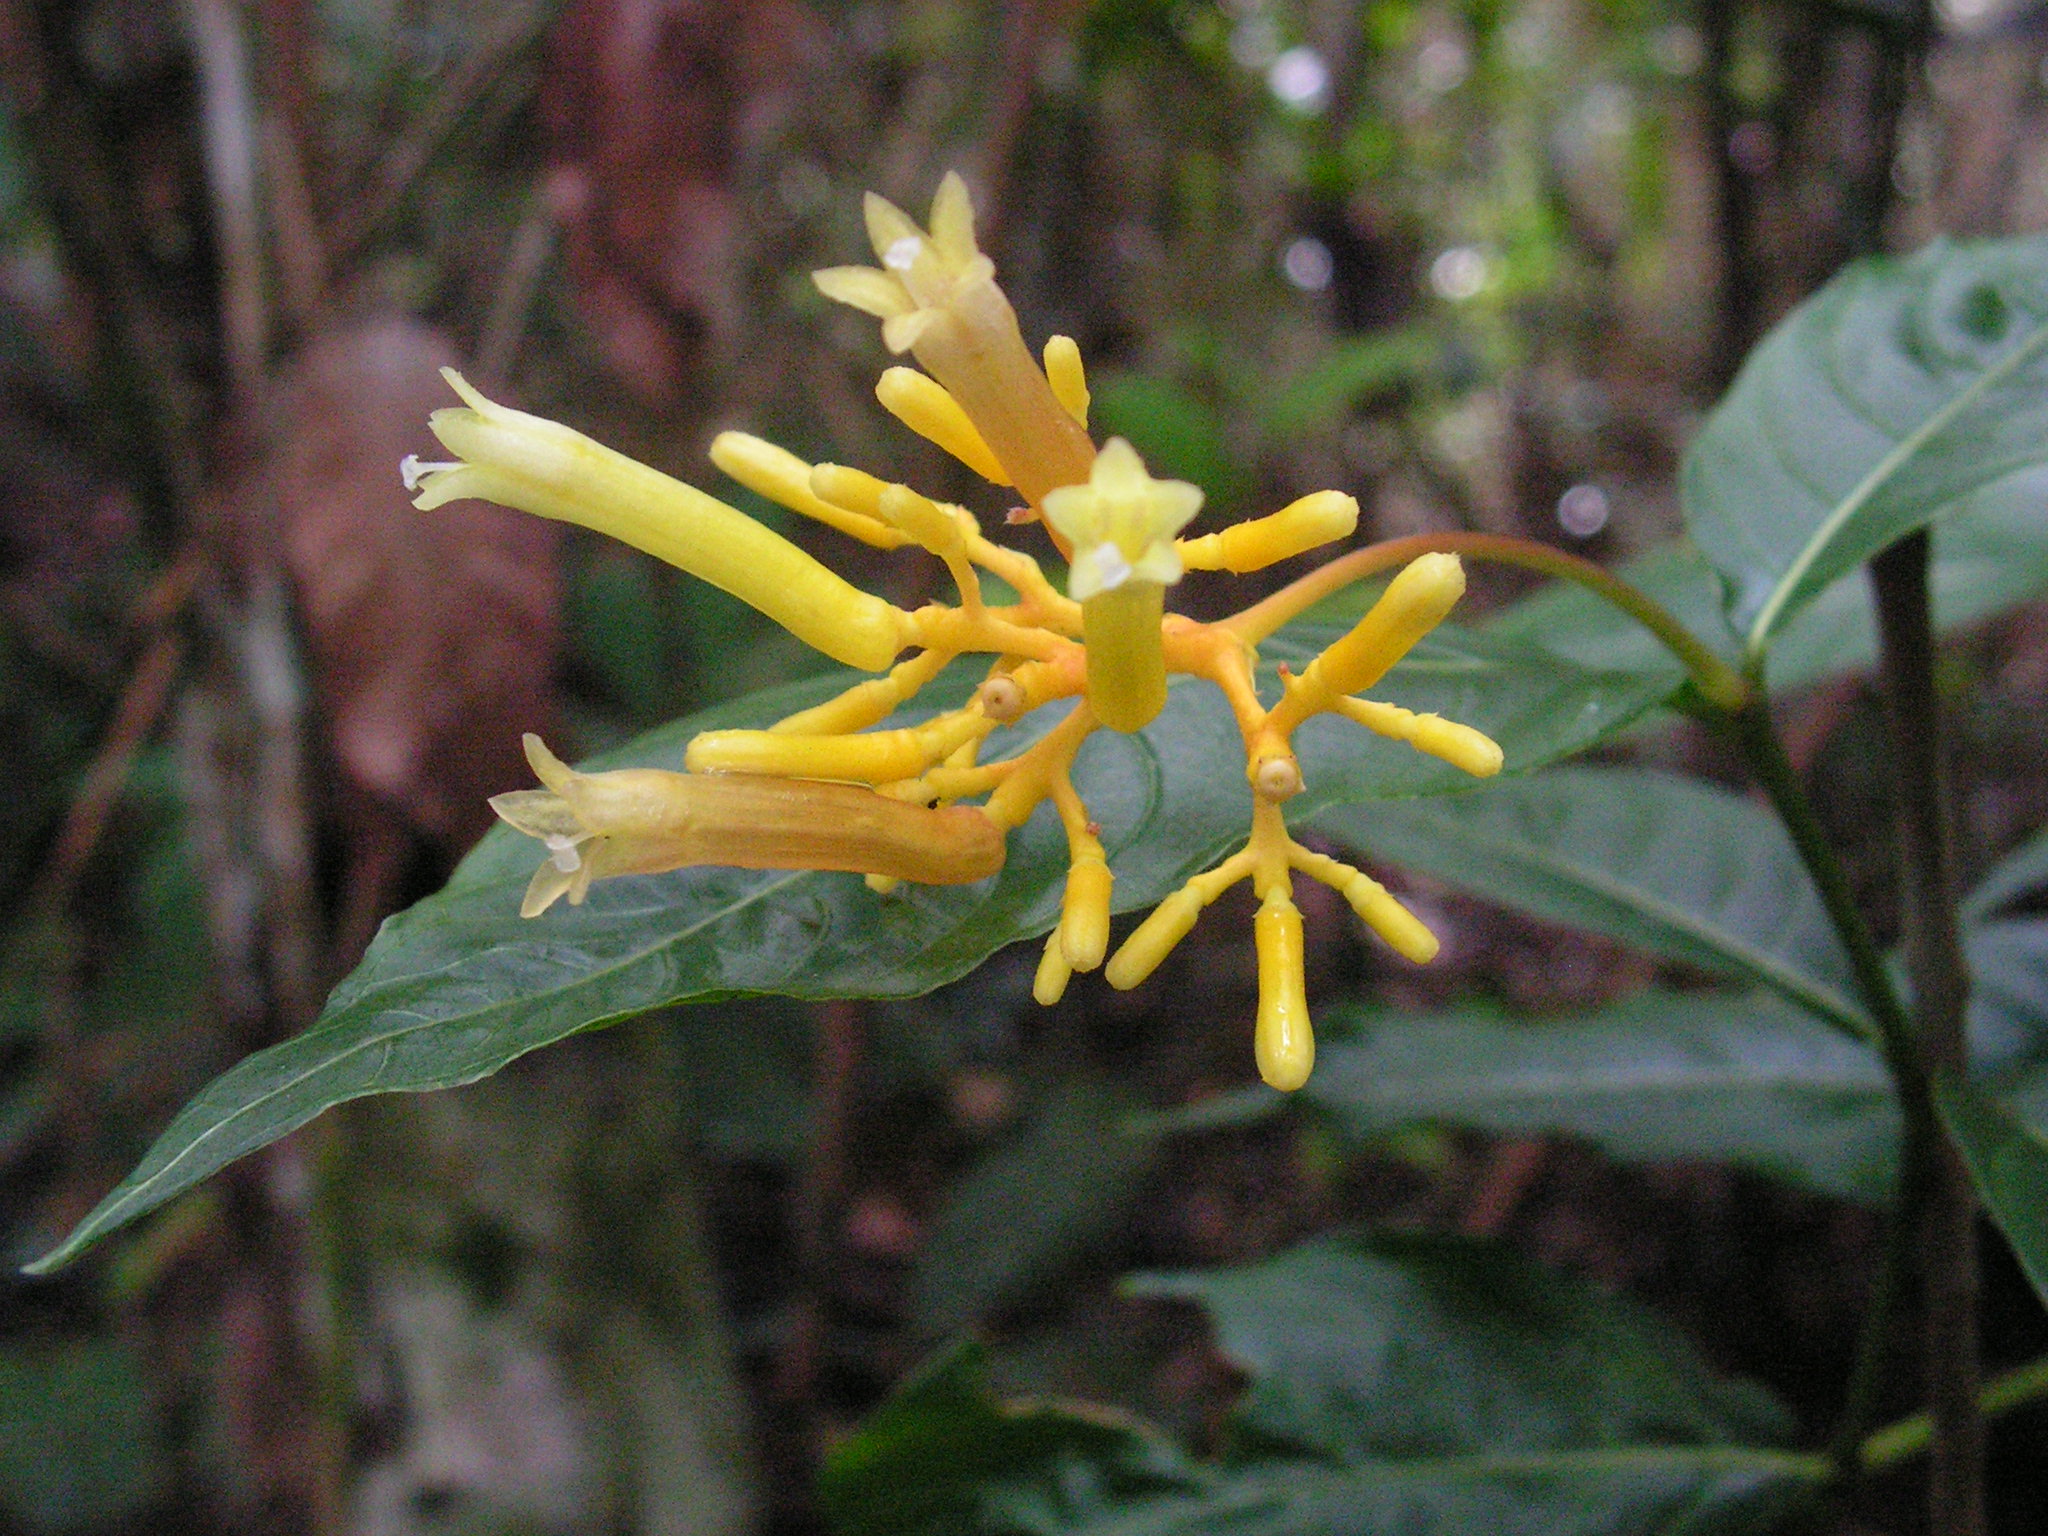 a single yellow flower is blooming next to some dark green leaves